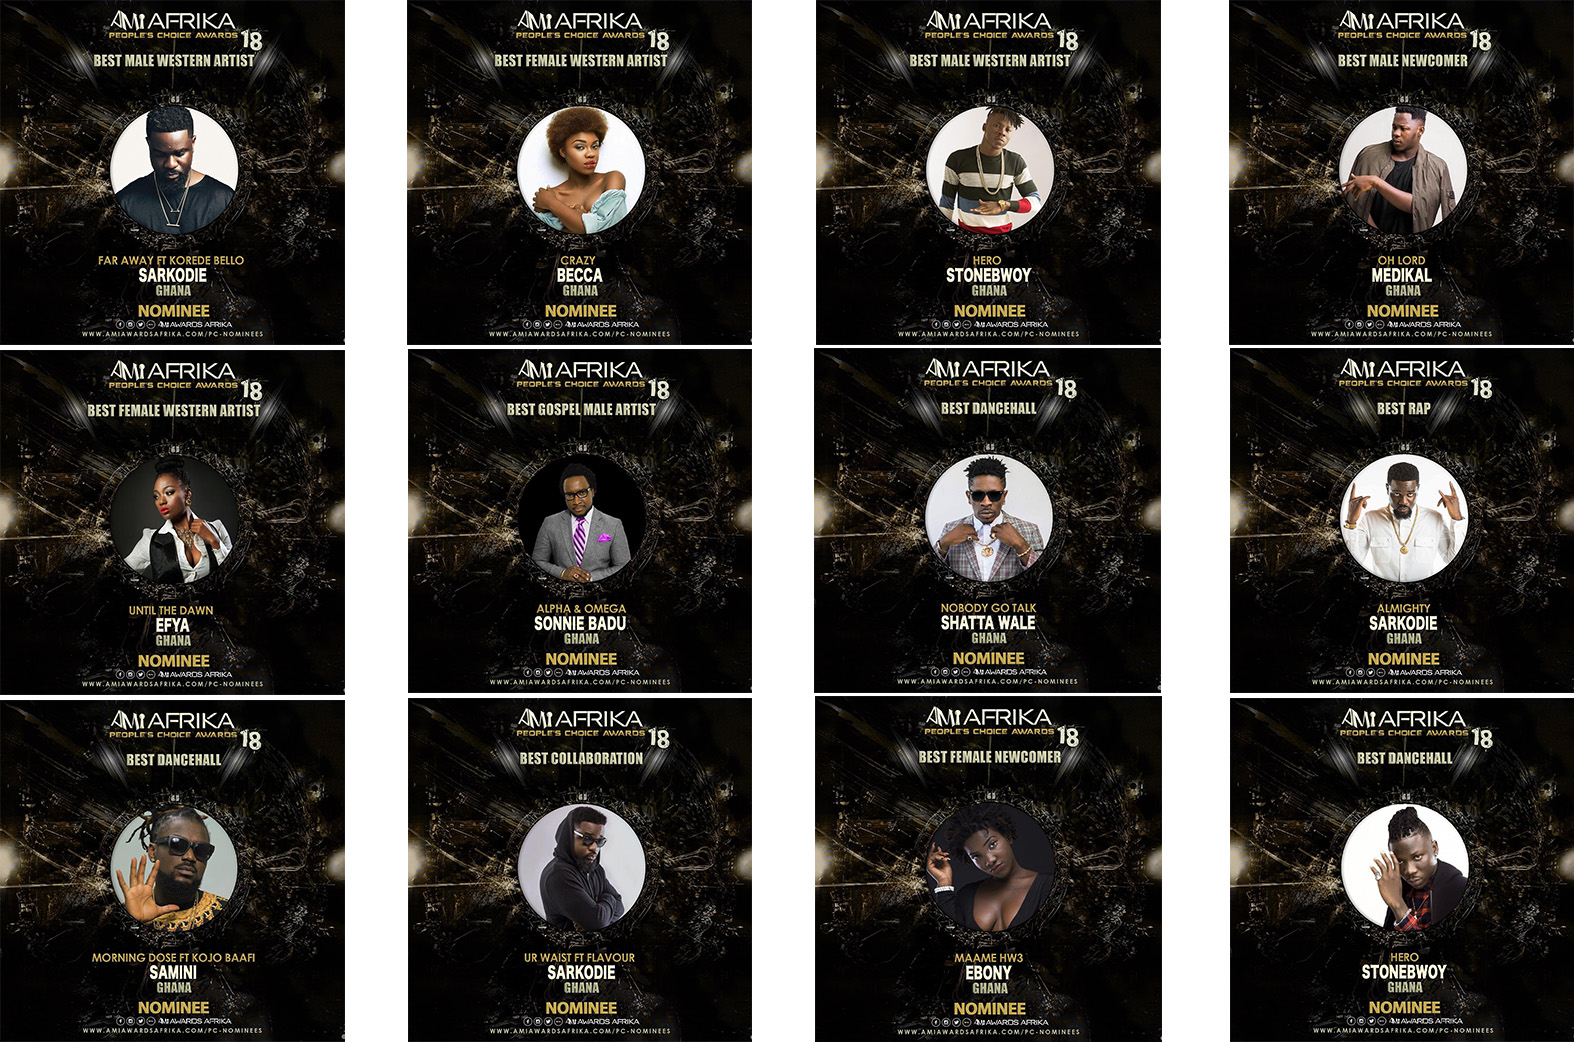 Sarkodie and Stonebwoy get 3&2 nominations as eight Ghanaians are nominated for AMI Awards Afrika